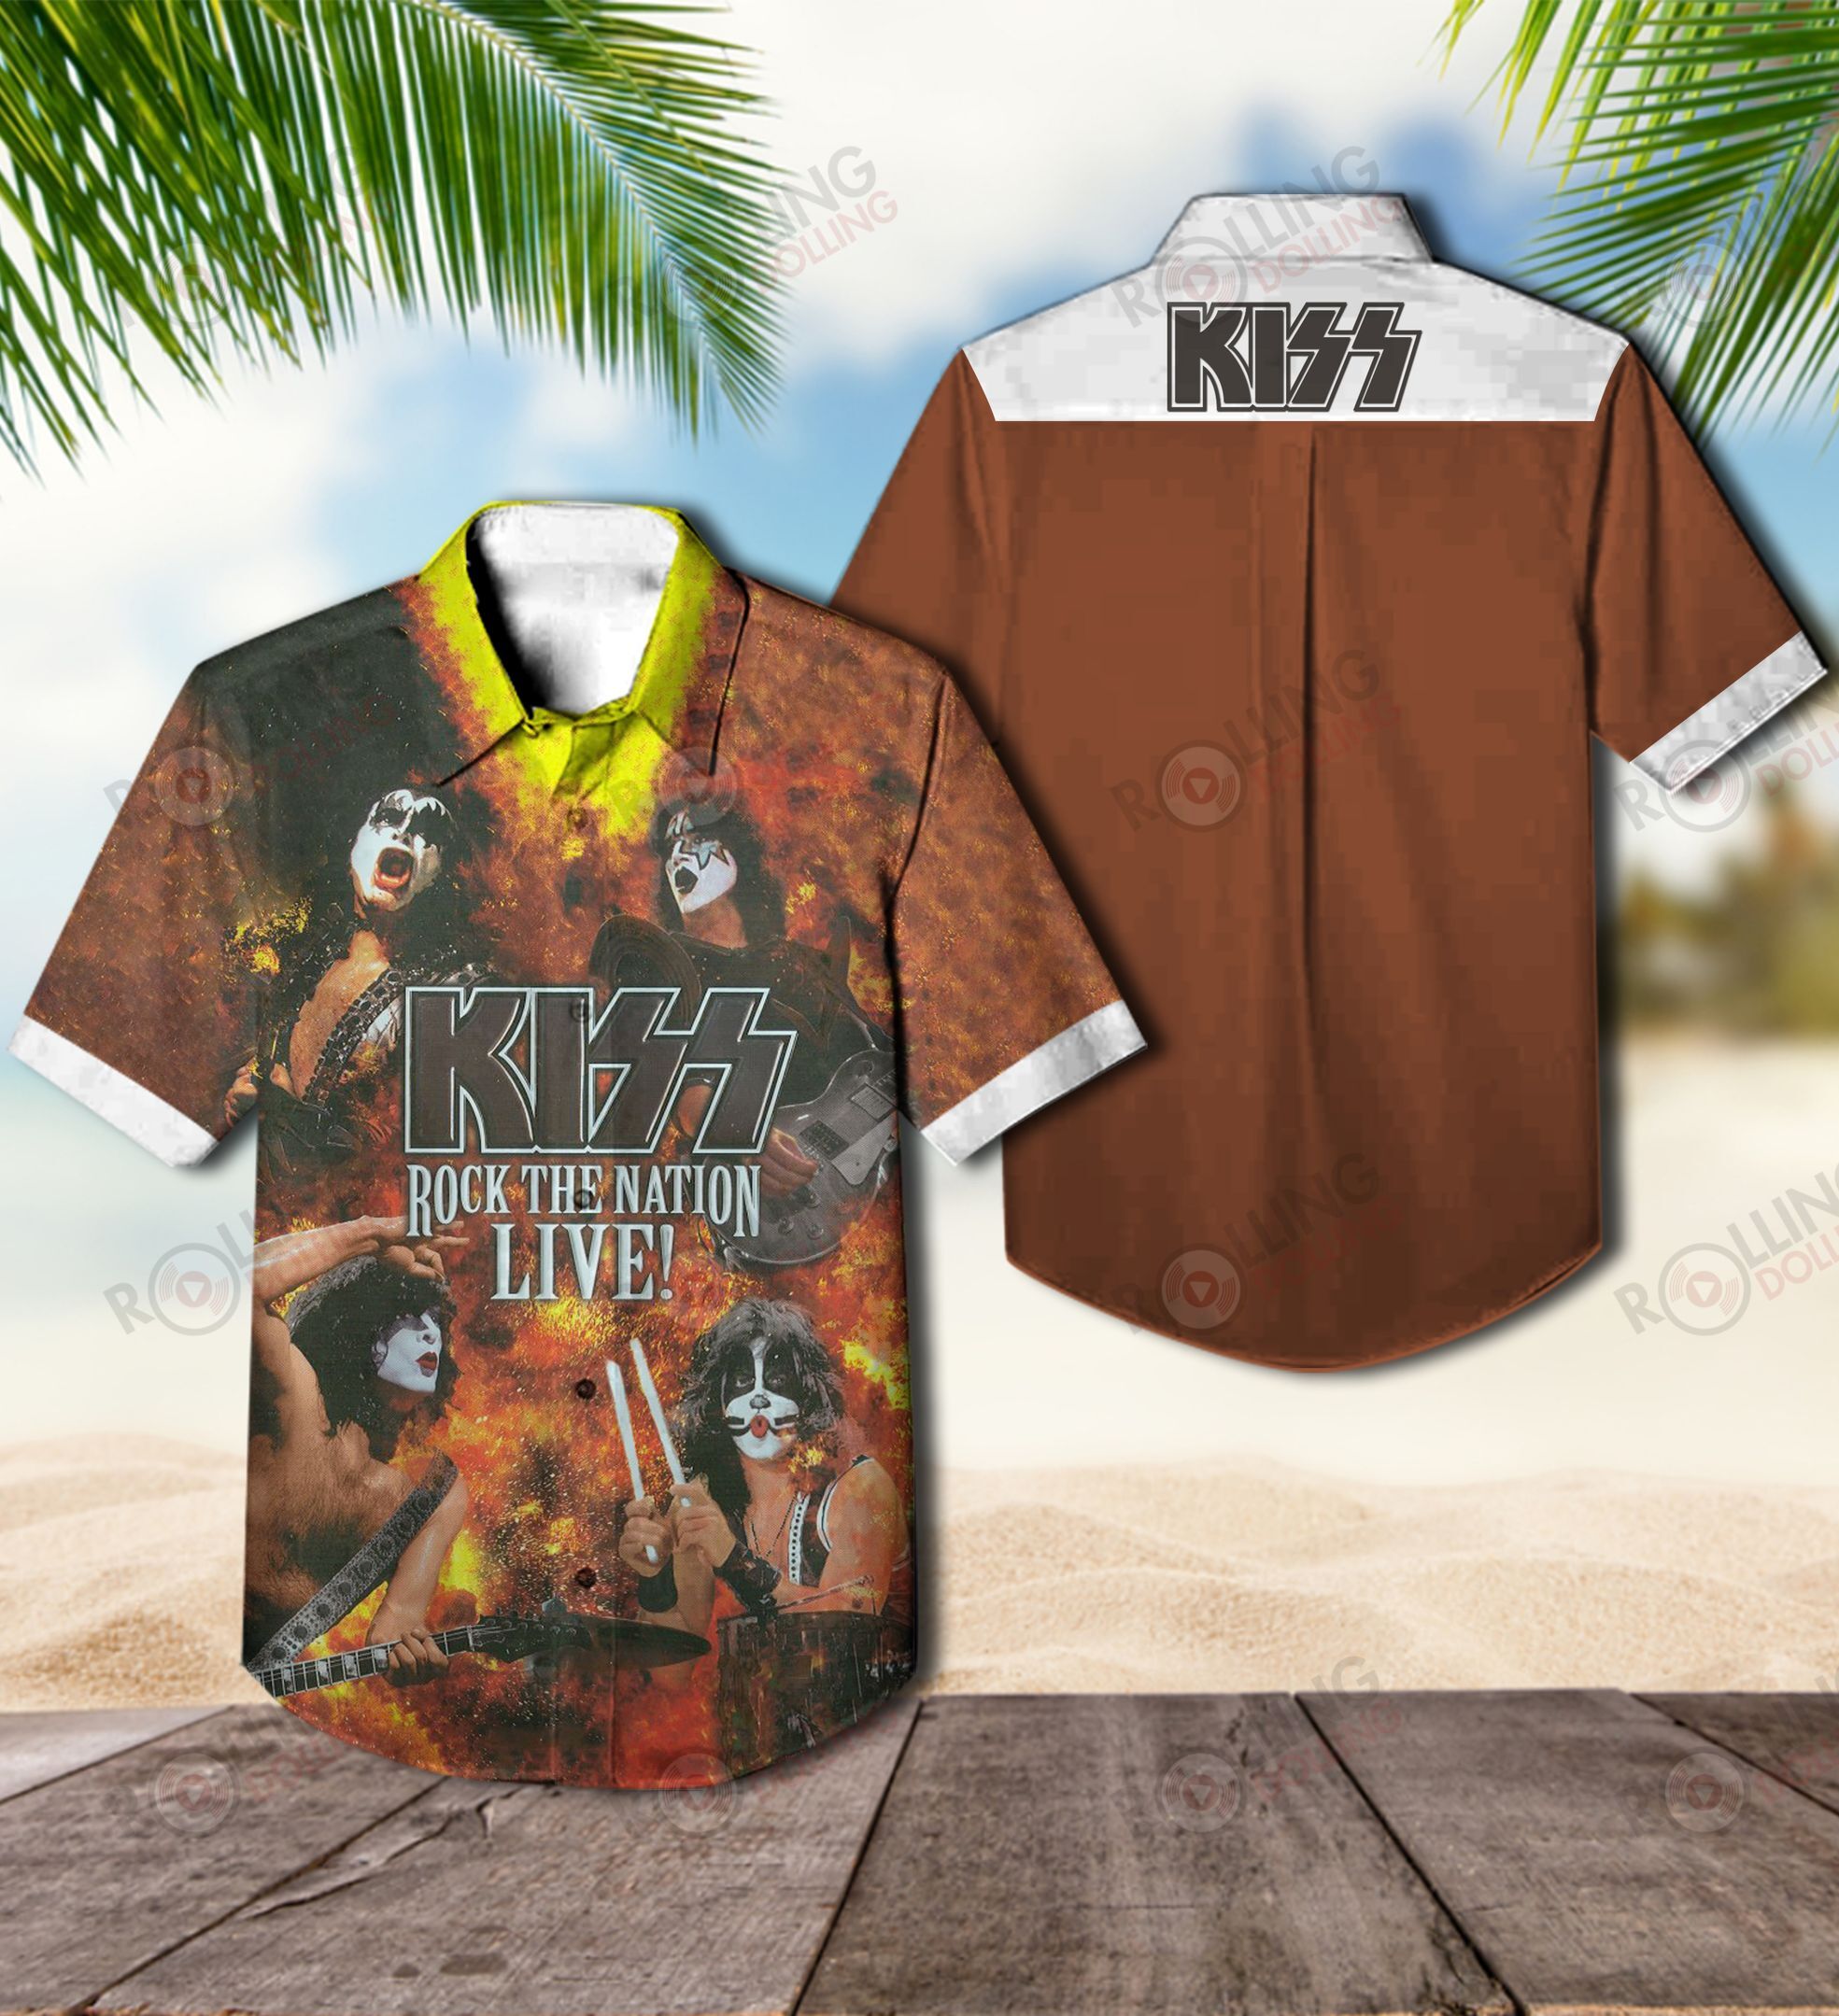 We have compiled a list of some of the best Hawaiian shirt that are available 145